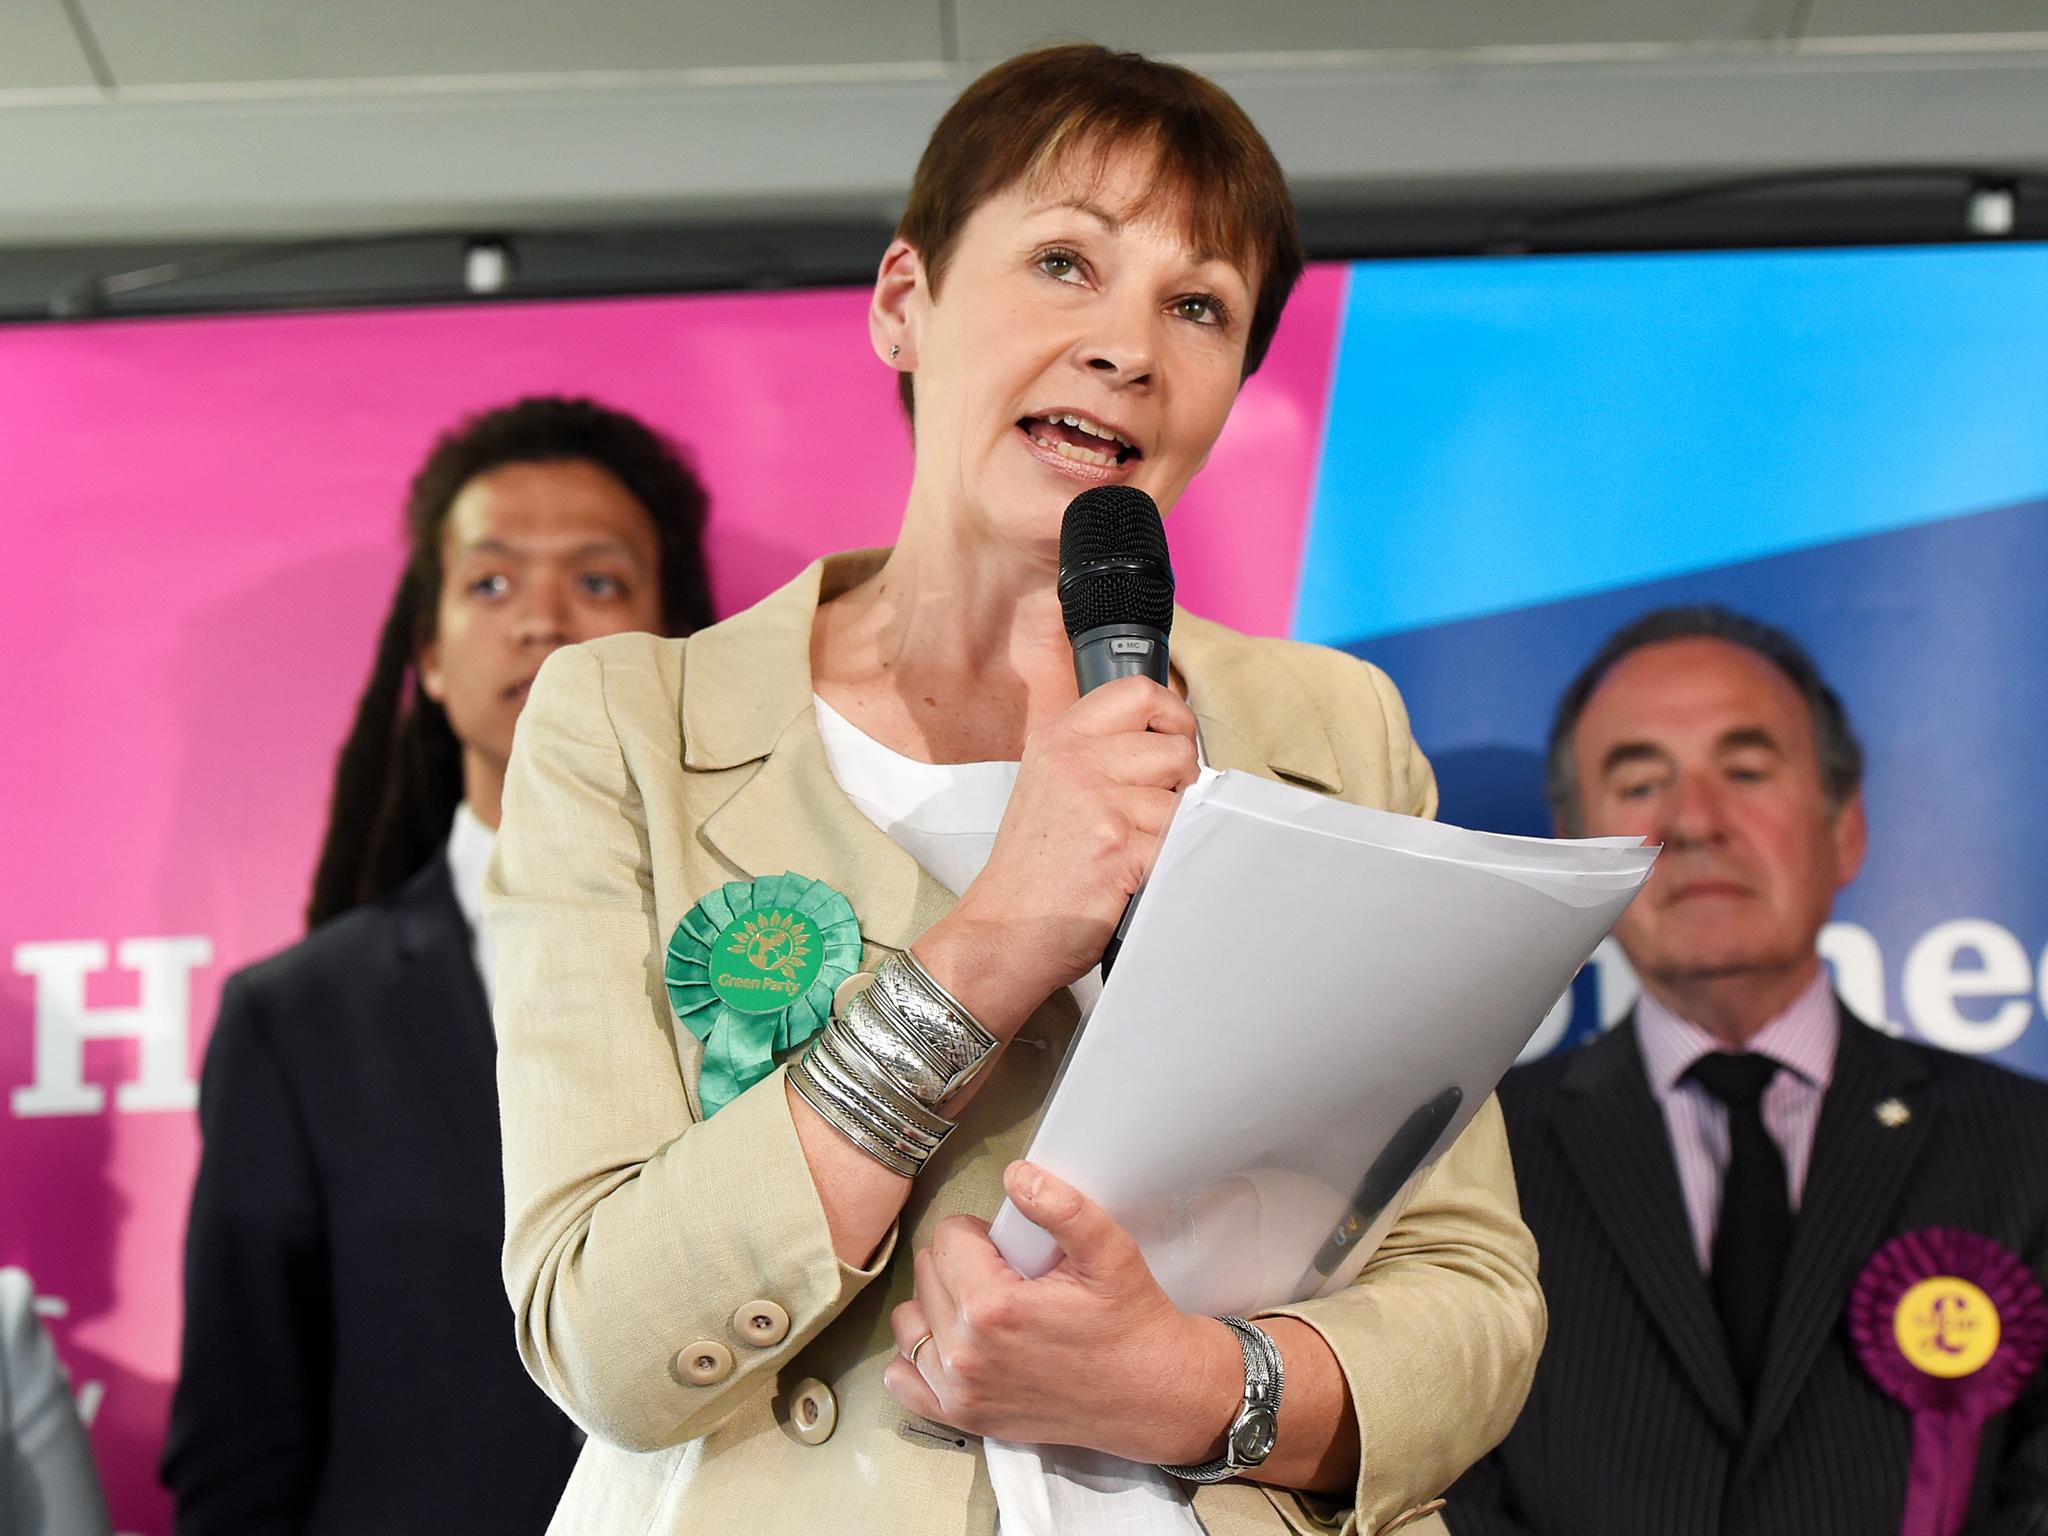 Co-leader of the Green party Caroline Lucas